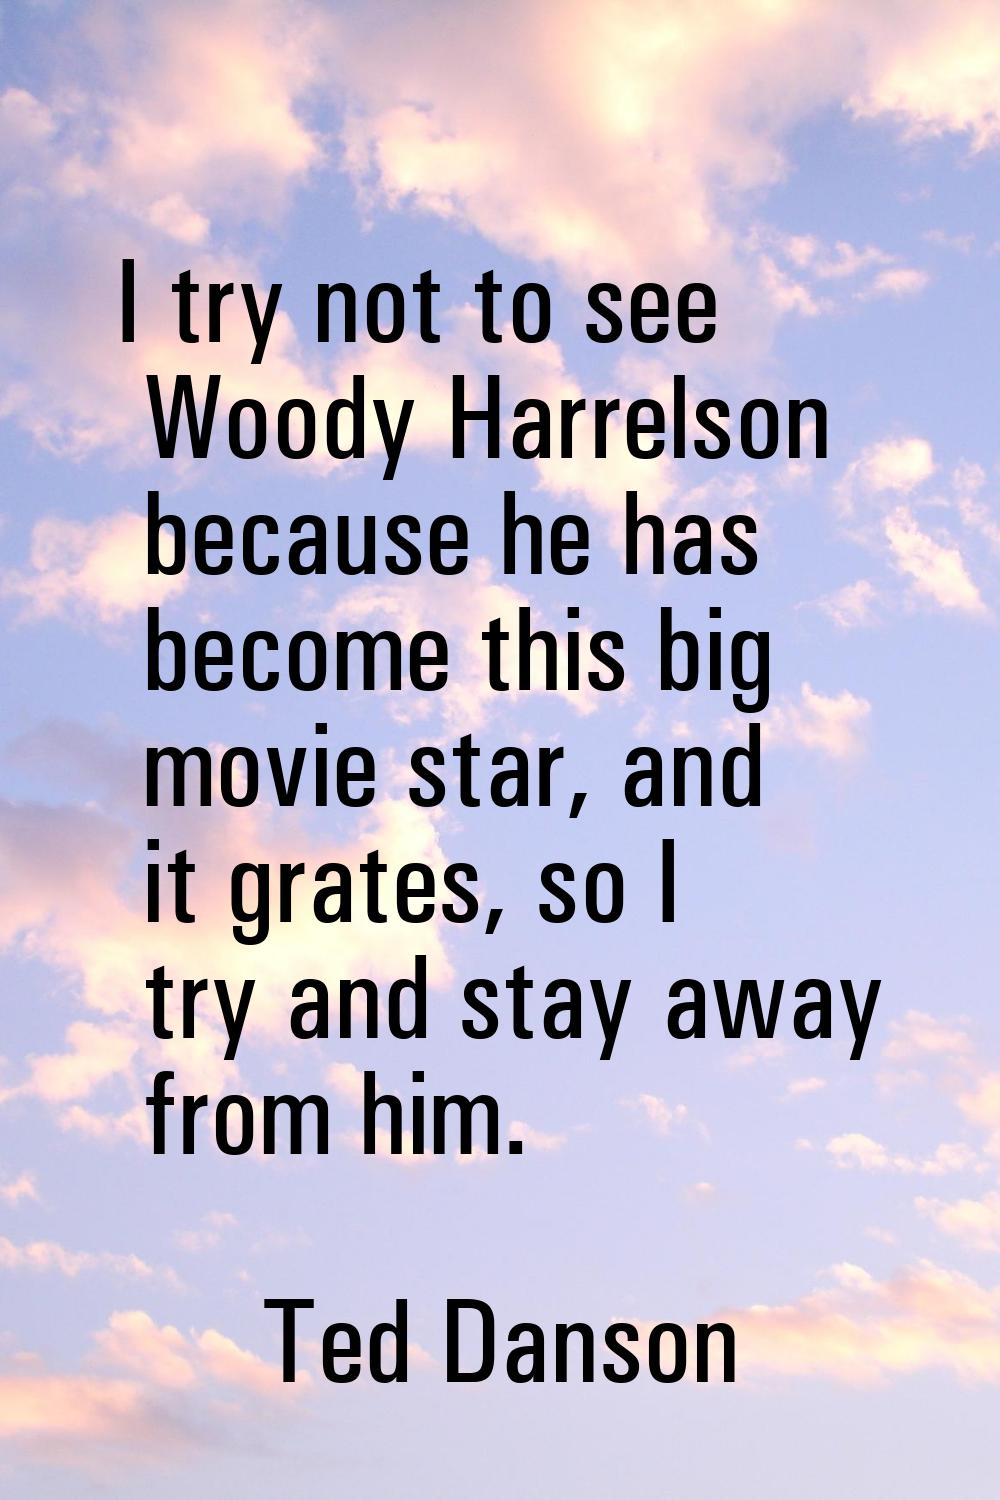 I try not to see Woody Harrelson because he has become this big movie star, and it grates, so I try